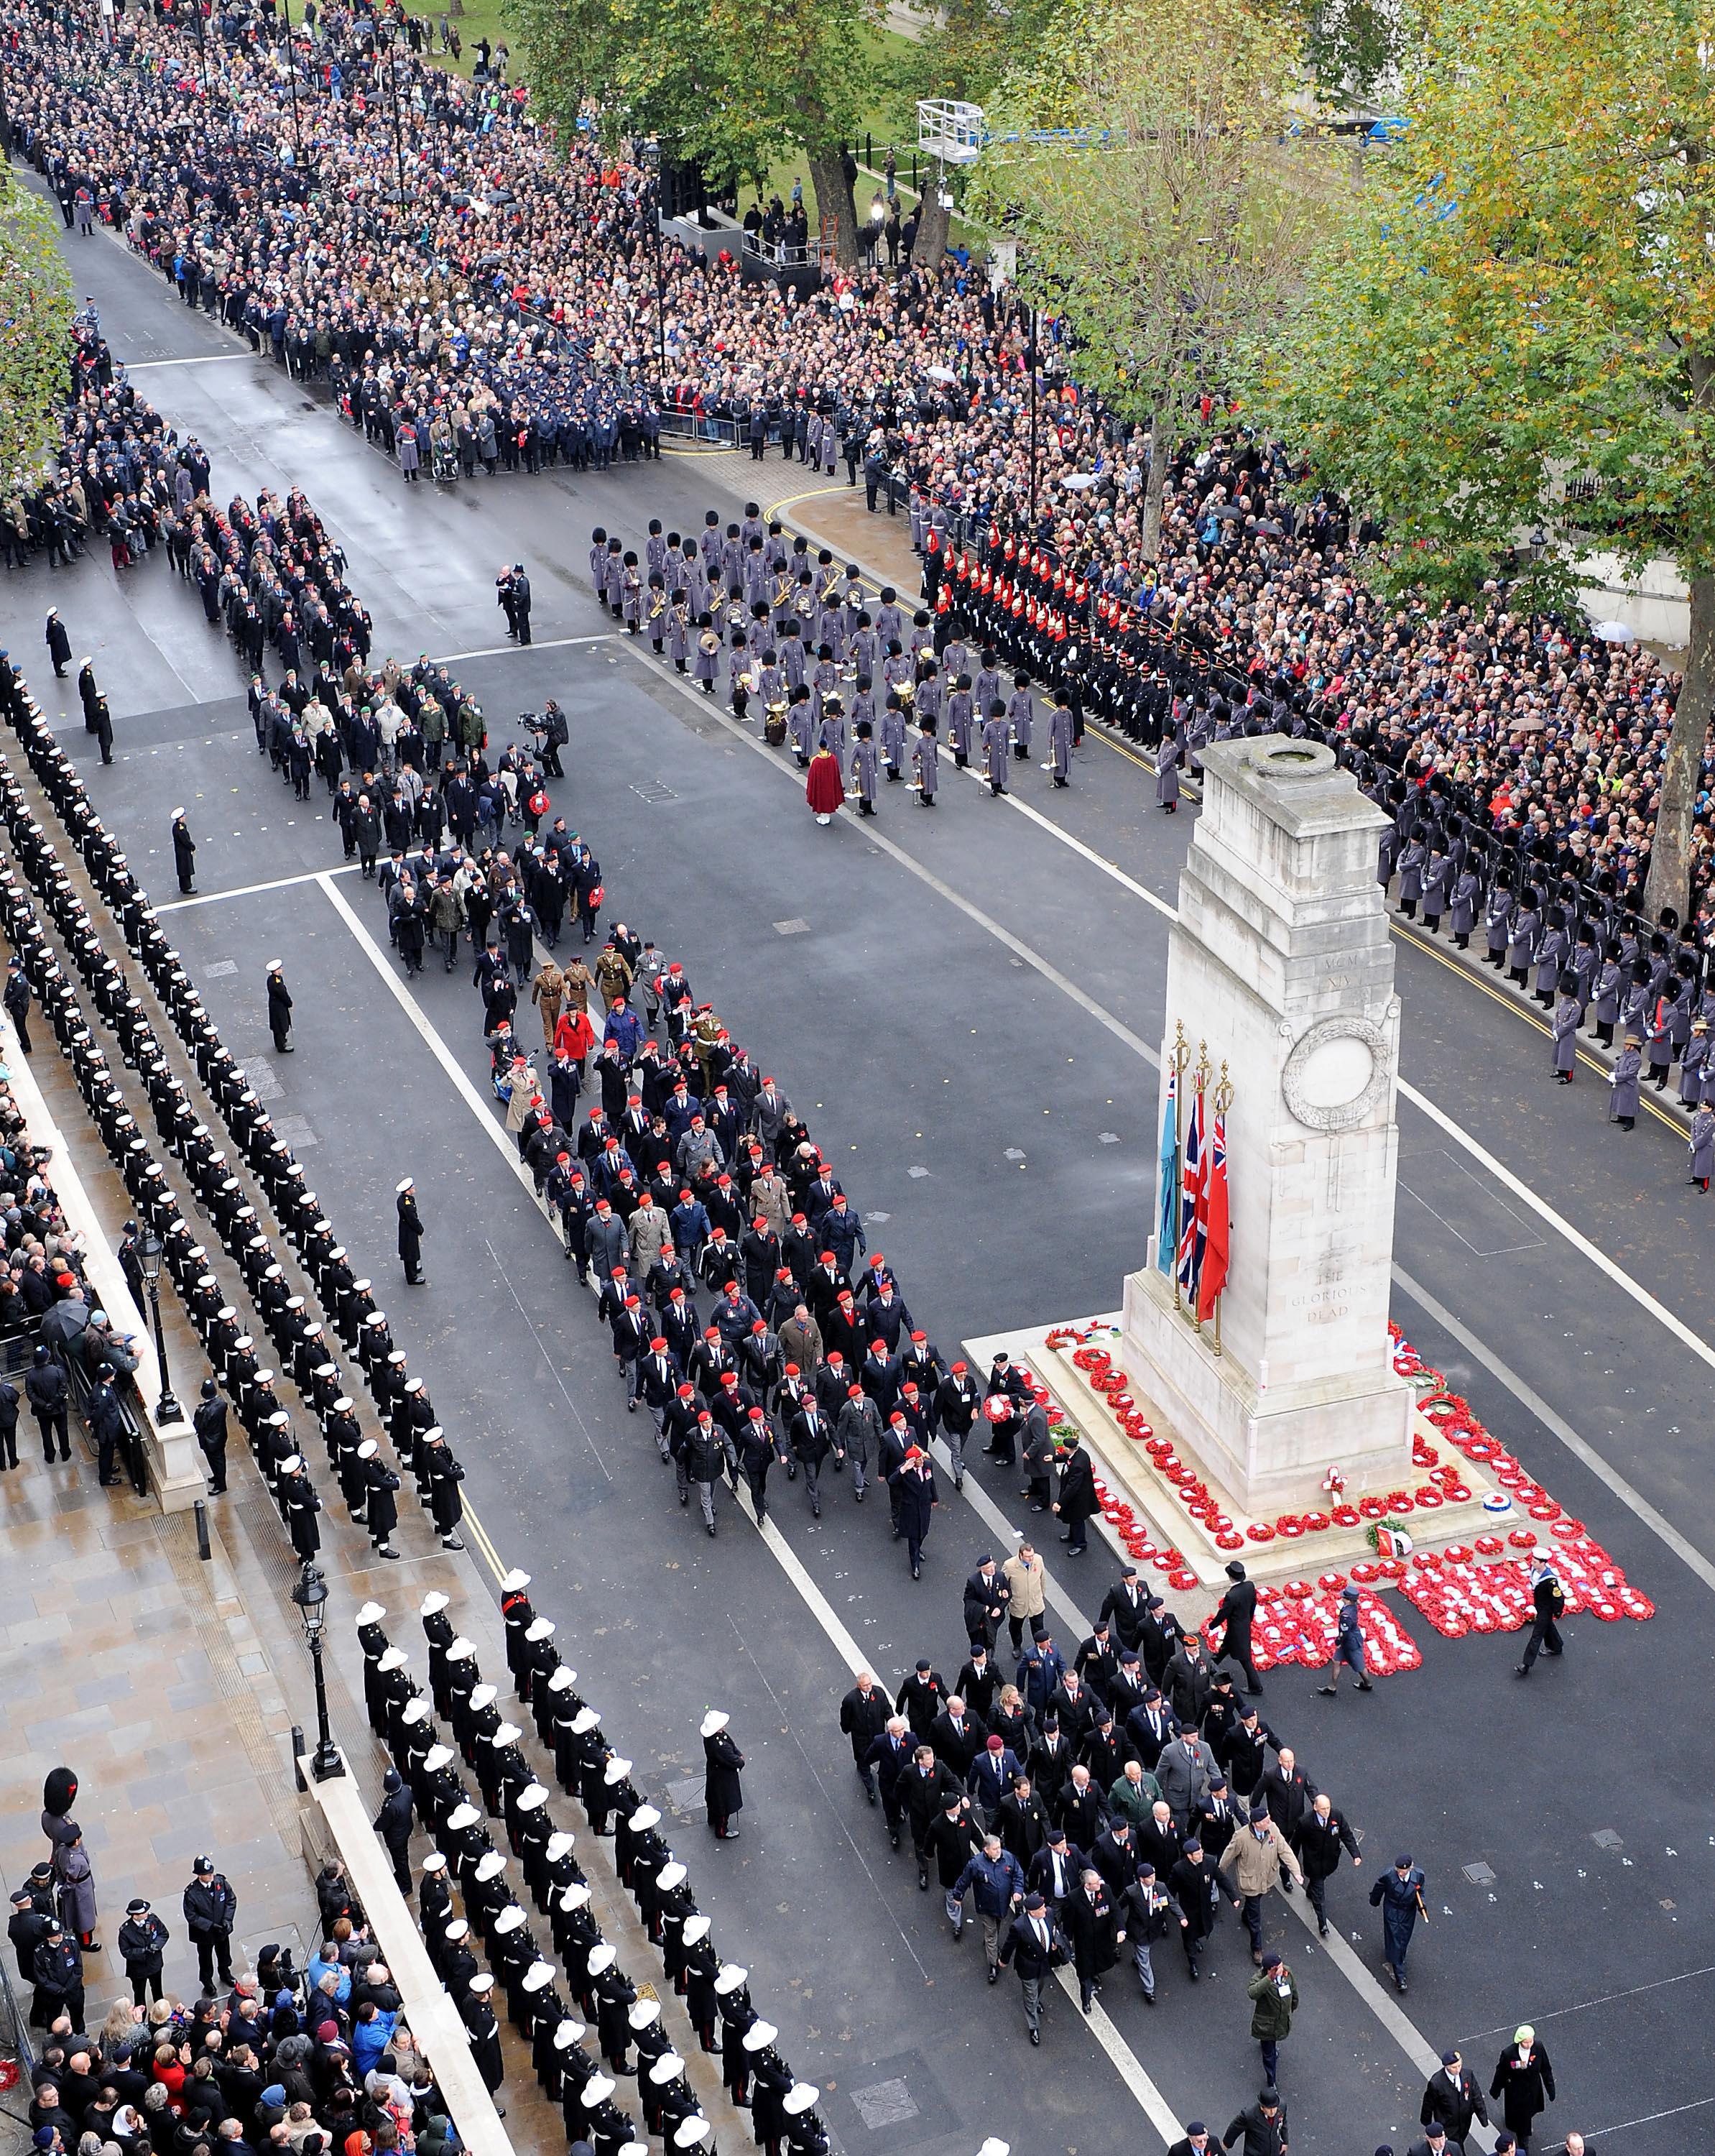 Veterans_March_Past_the_Cenotaph_London_During_Remembrance_Sunday_Service_MOD_45152053.jpg